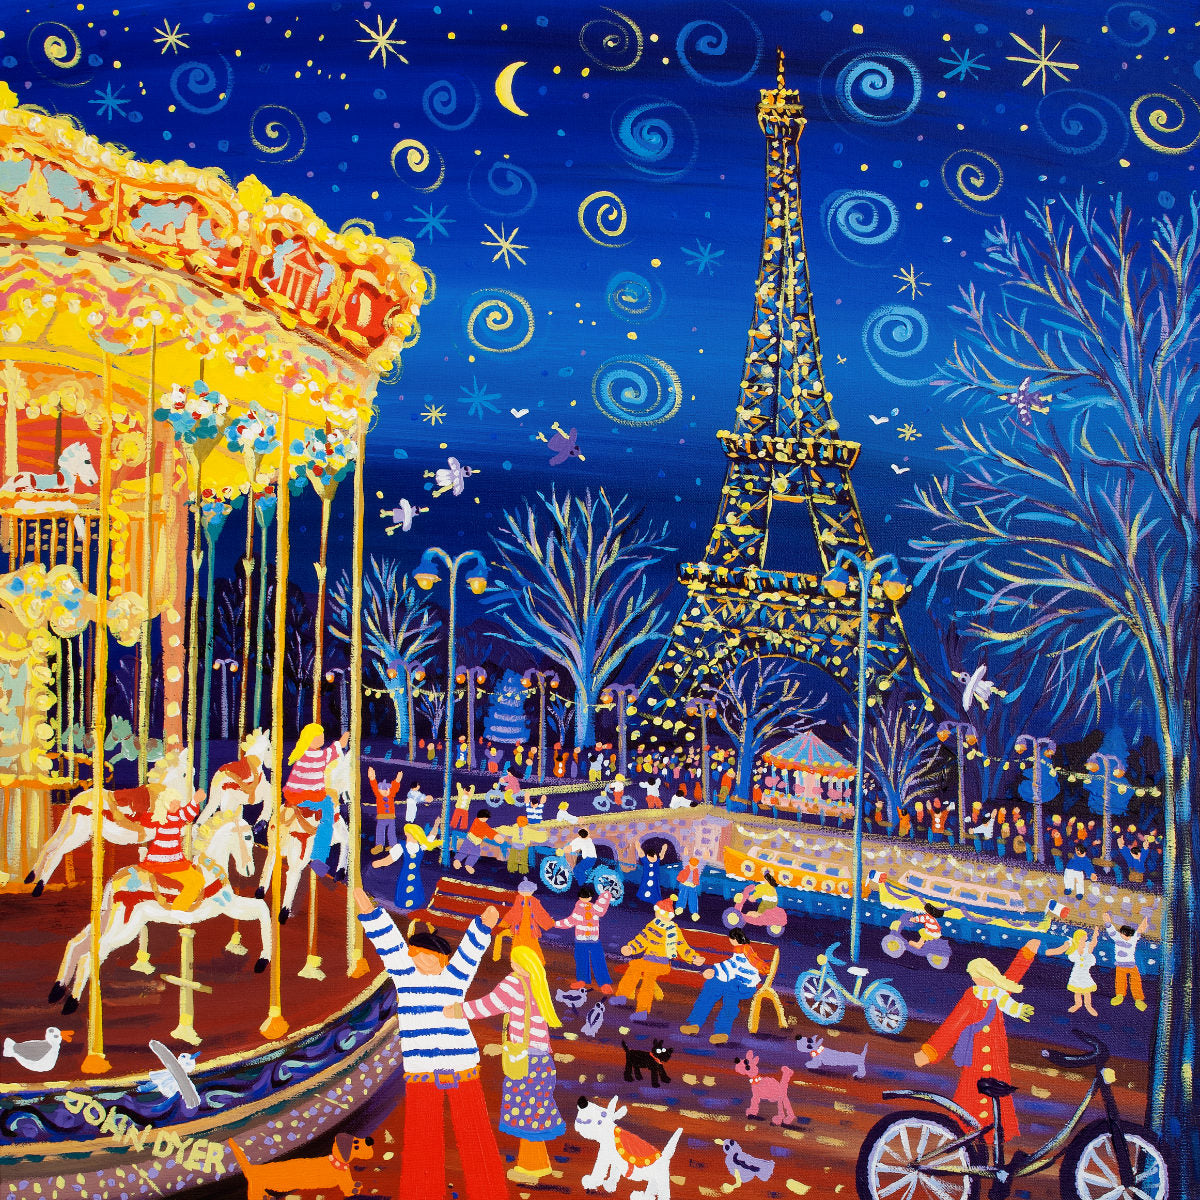 Signed print of the Eiffel Tower in Paris by John Dyer